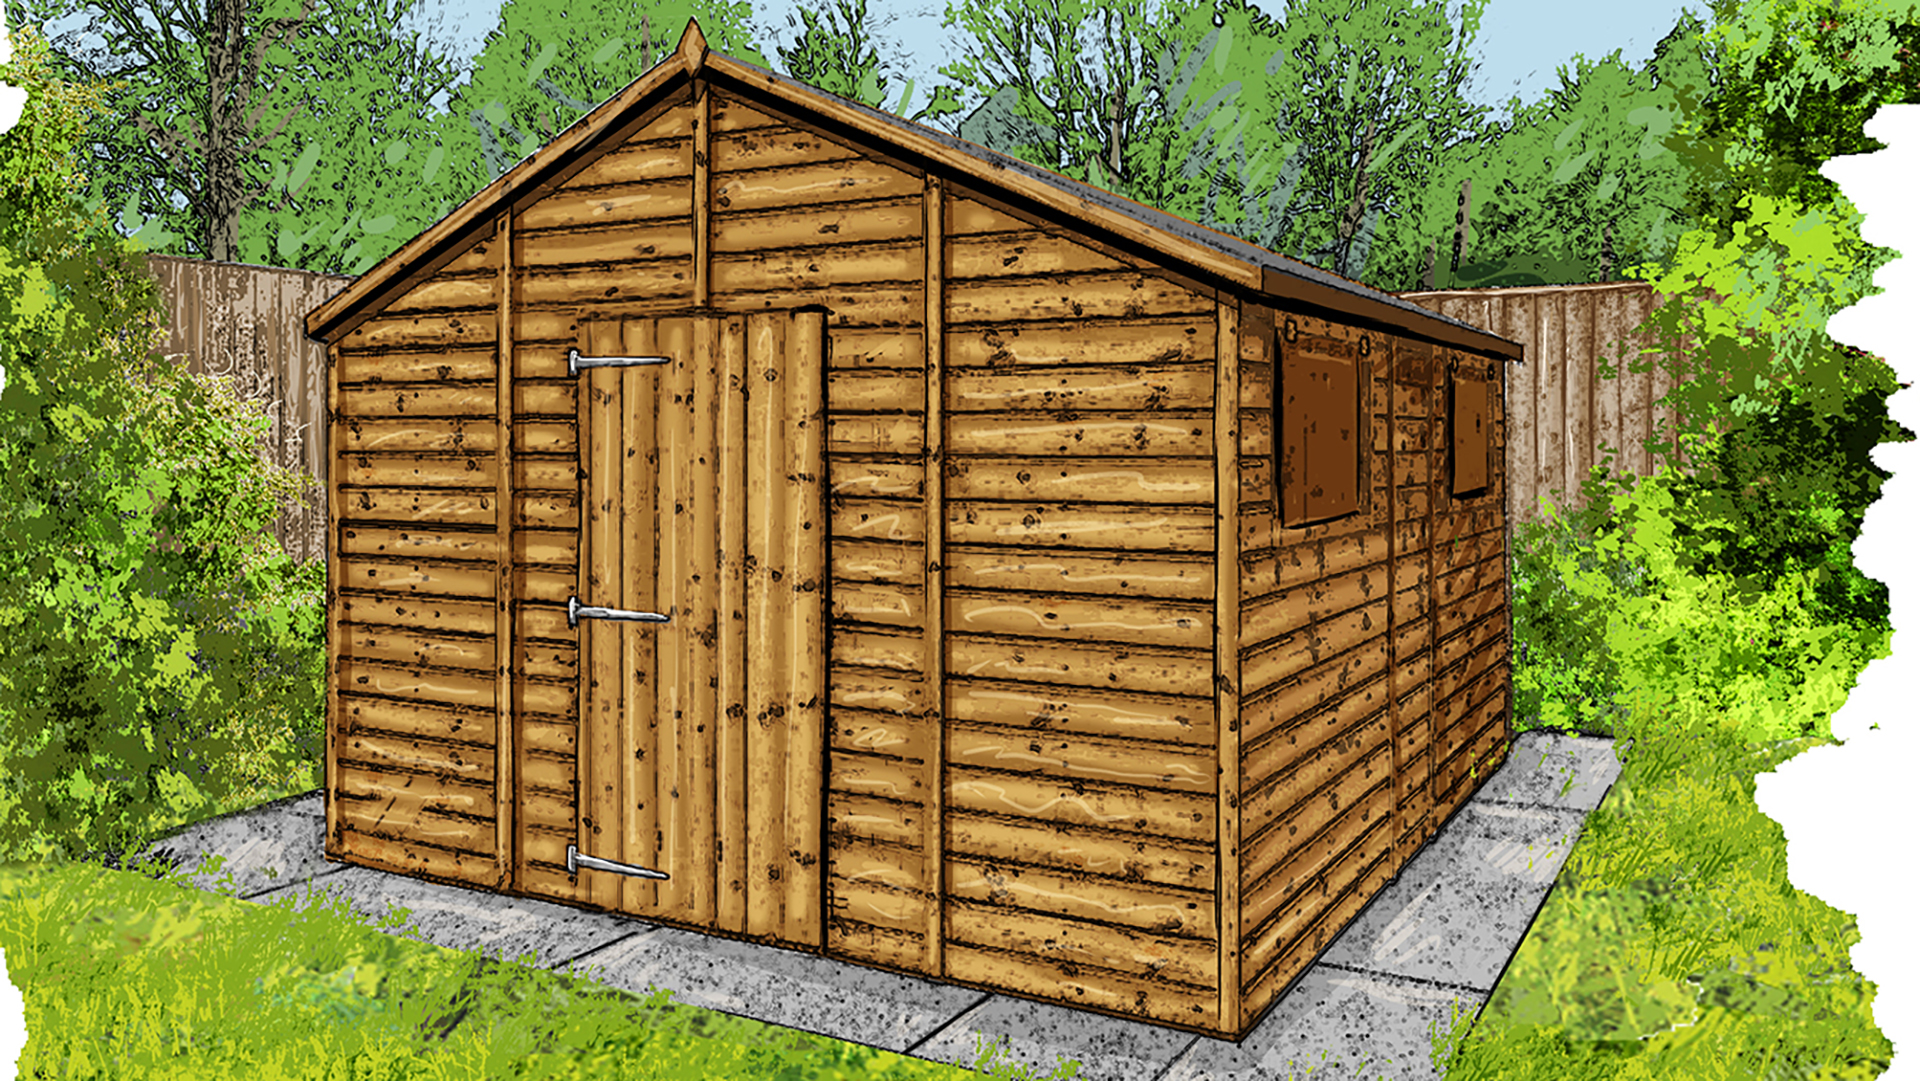 Woodwork expert Rob Lovett explains how to get started when building a shed. Illustration: Matthew Brazier